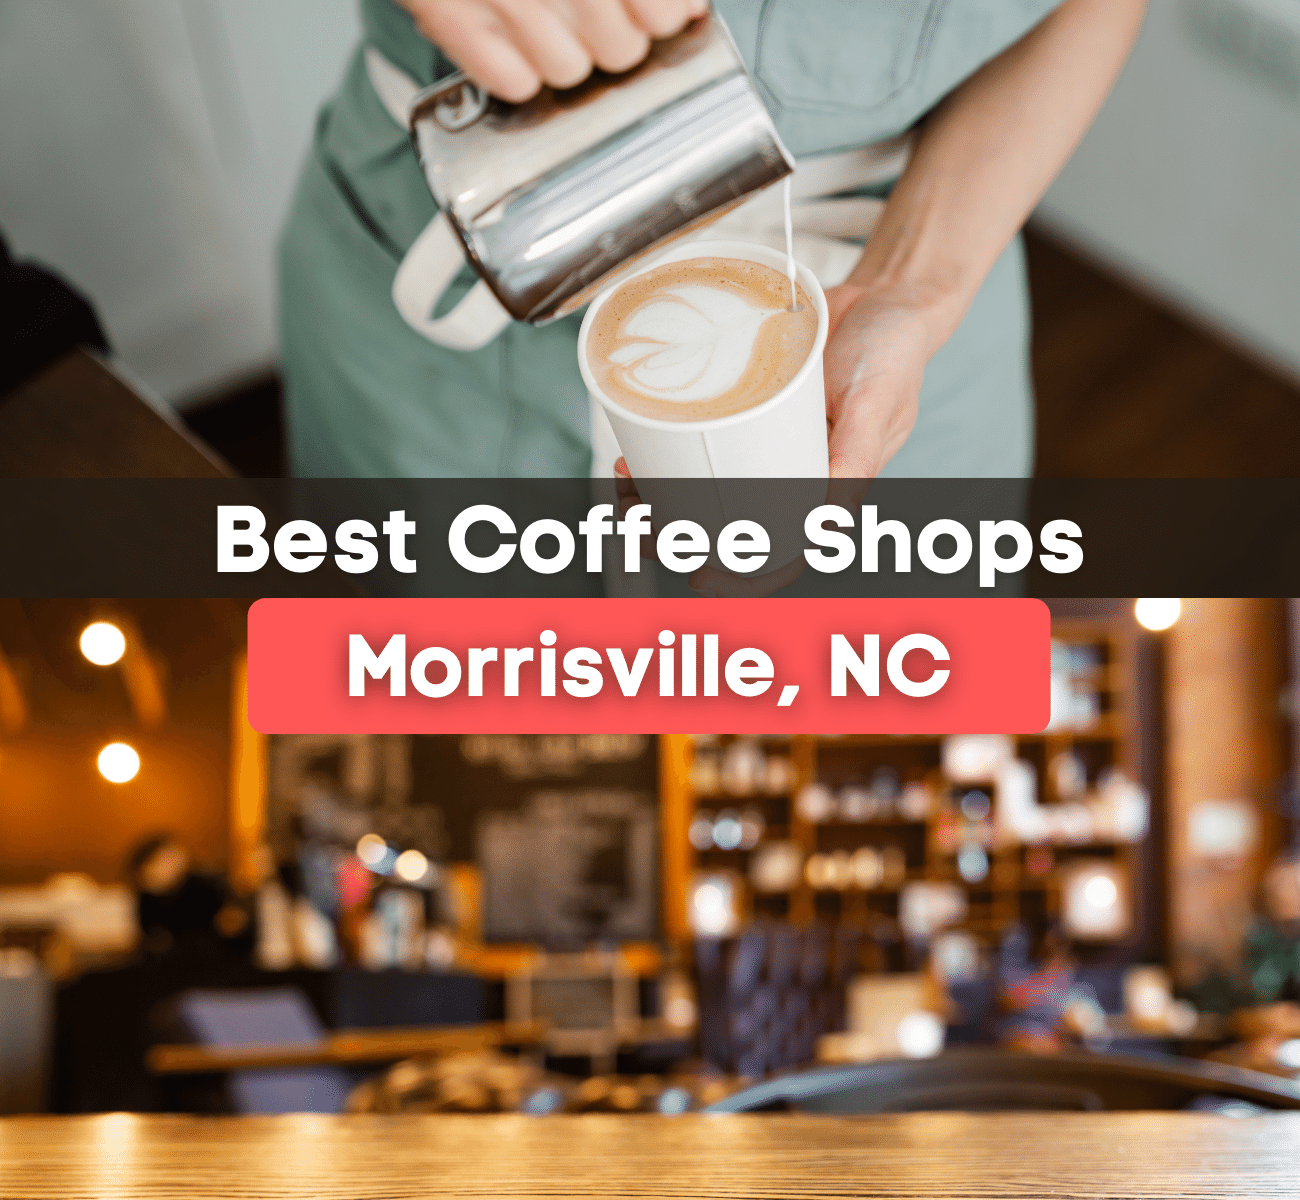 The Best Coffee Shops In Morrisville, NC